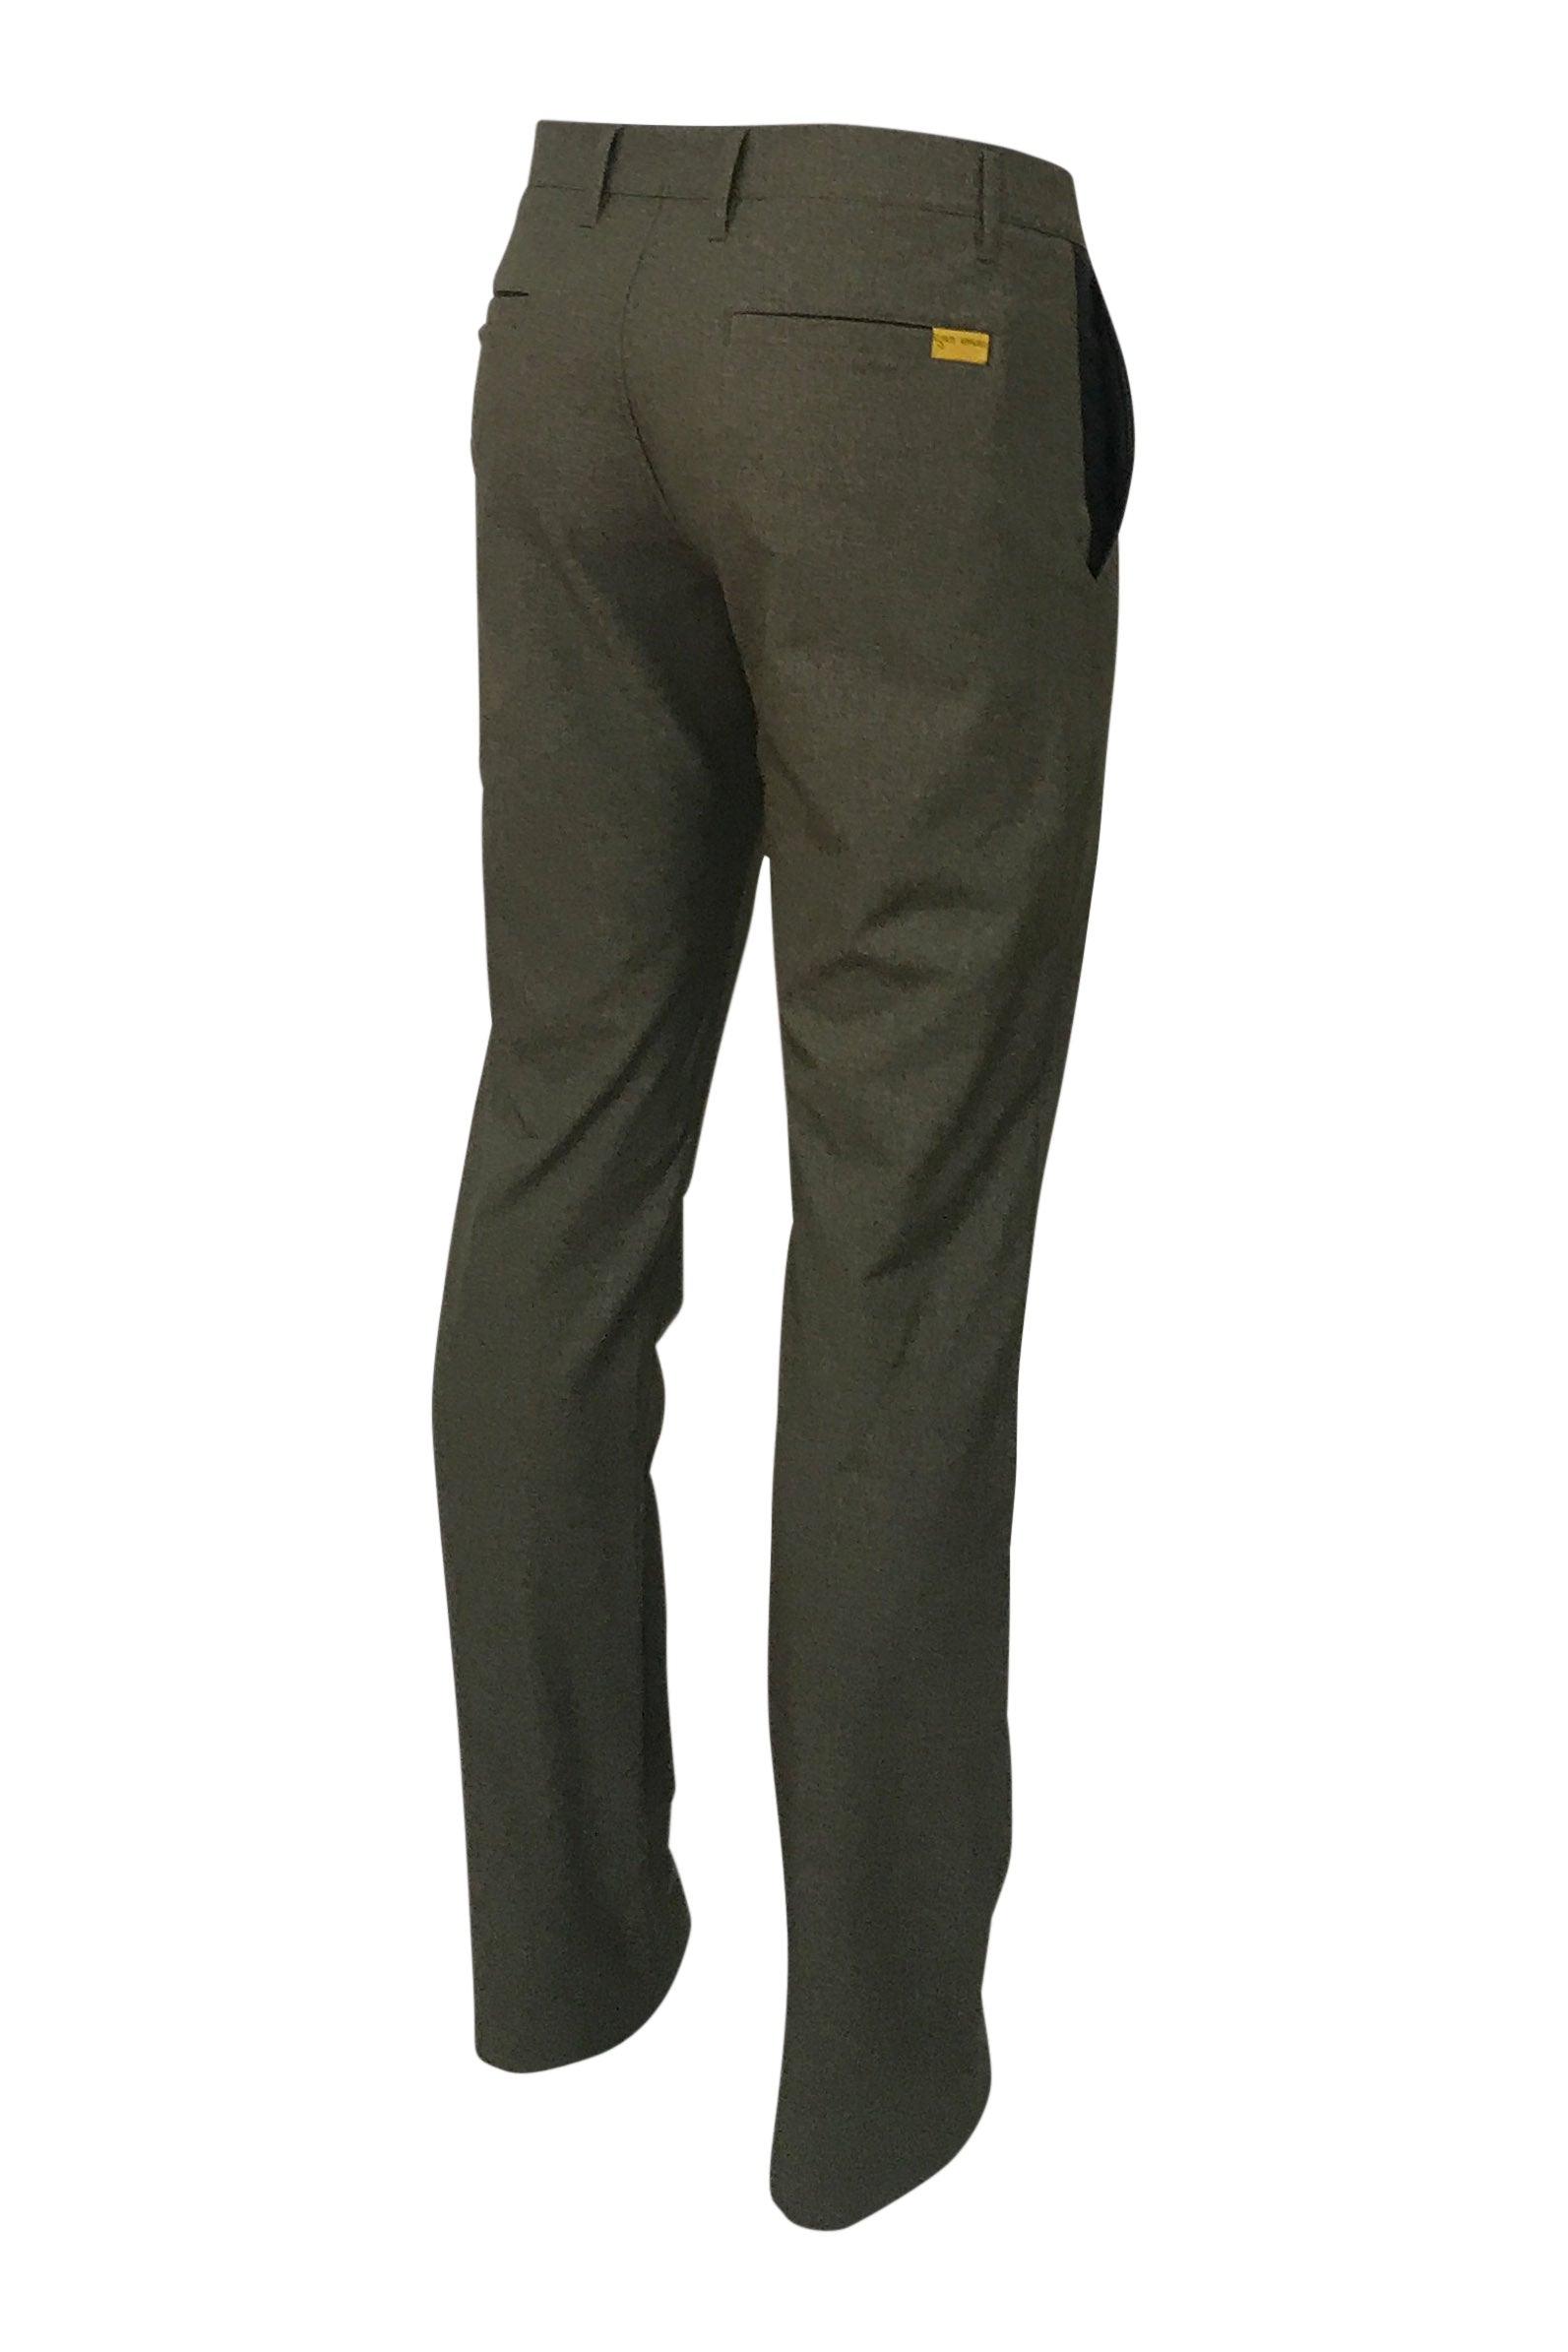 CLUBHOUSE PANTS - OLIVE GREEN